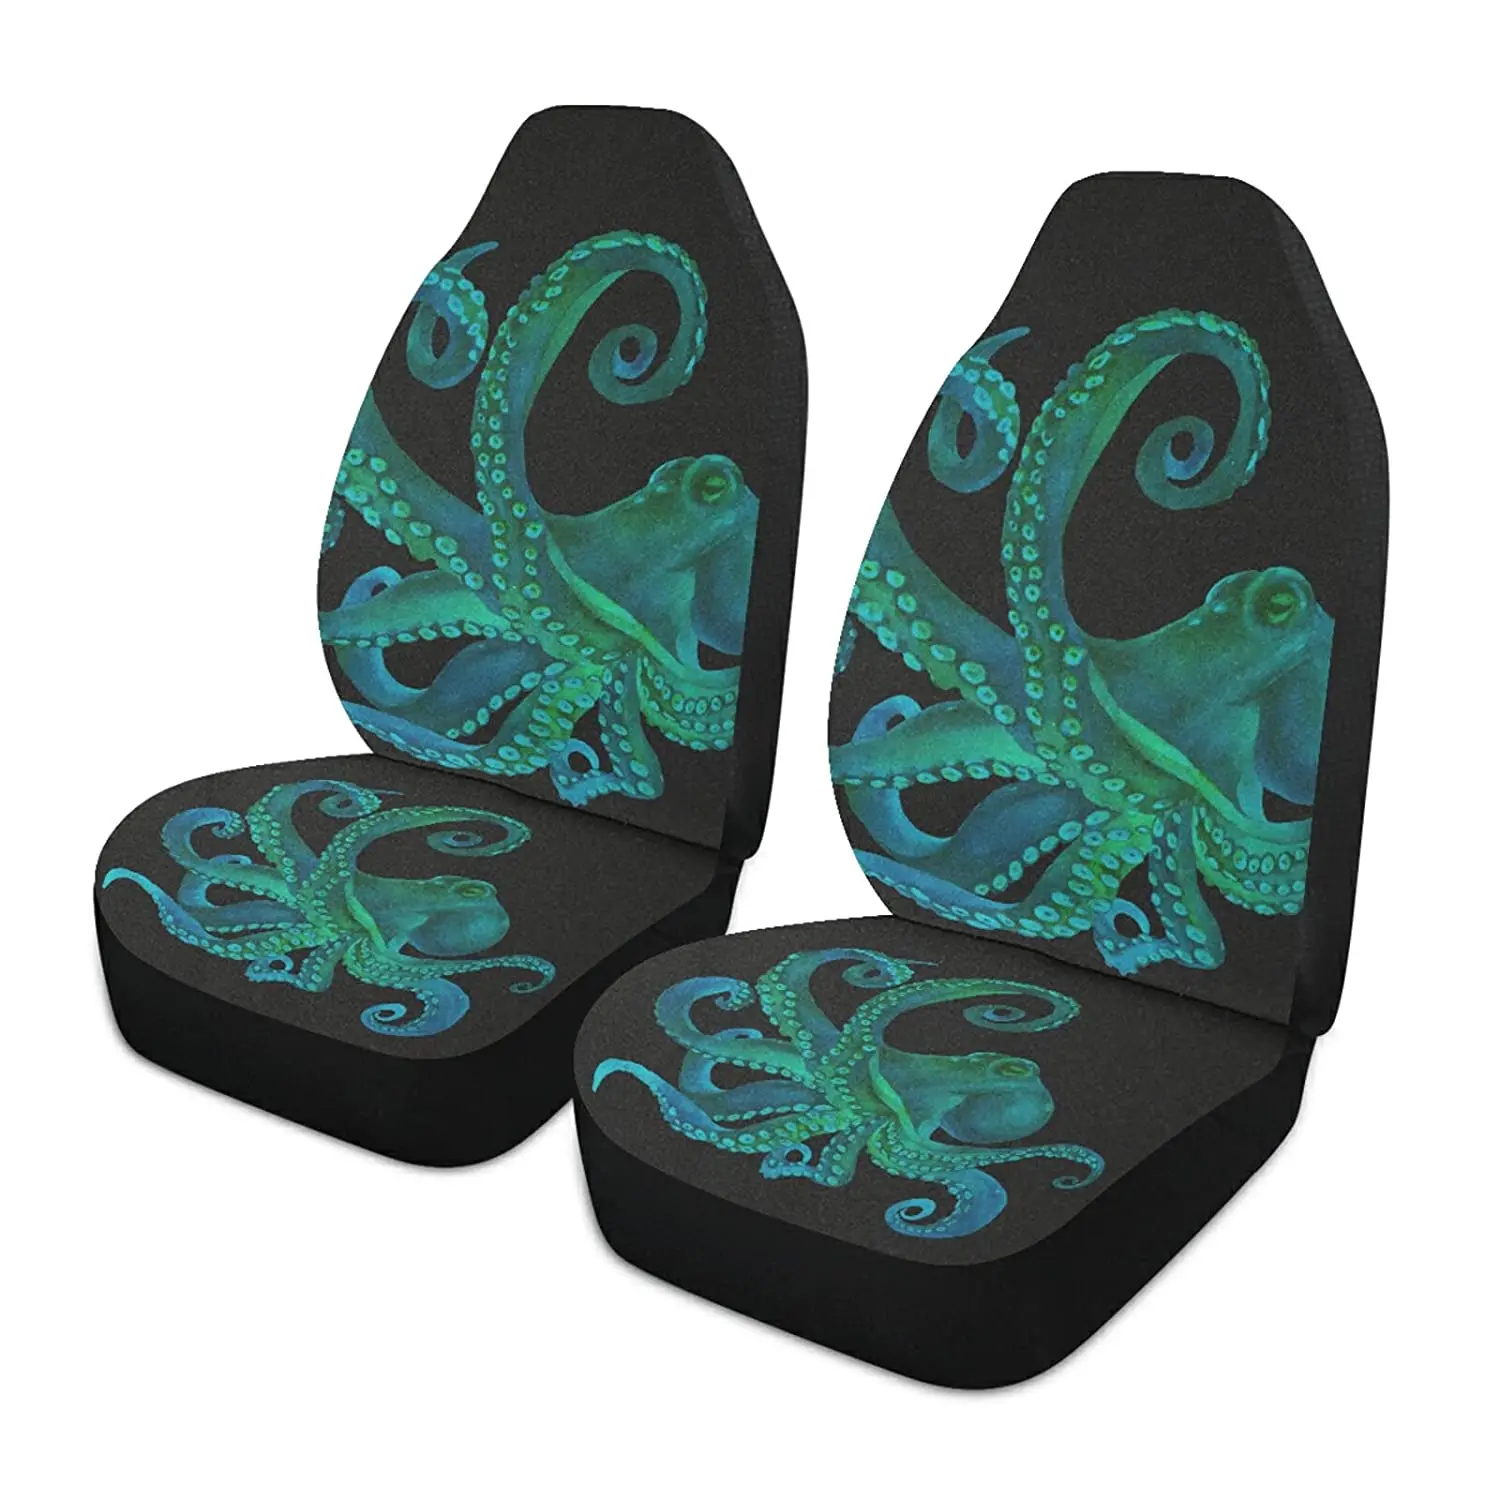 

Watercolor Octopus Car Seat Covers Front Seats Only for Women Men Seat Covers Organizer Pocket for Cars SUV Truck Sedan 2 pcs